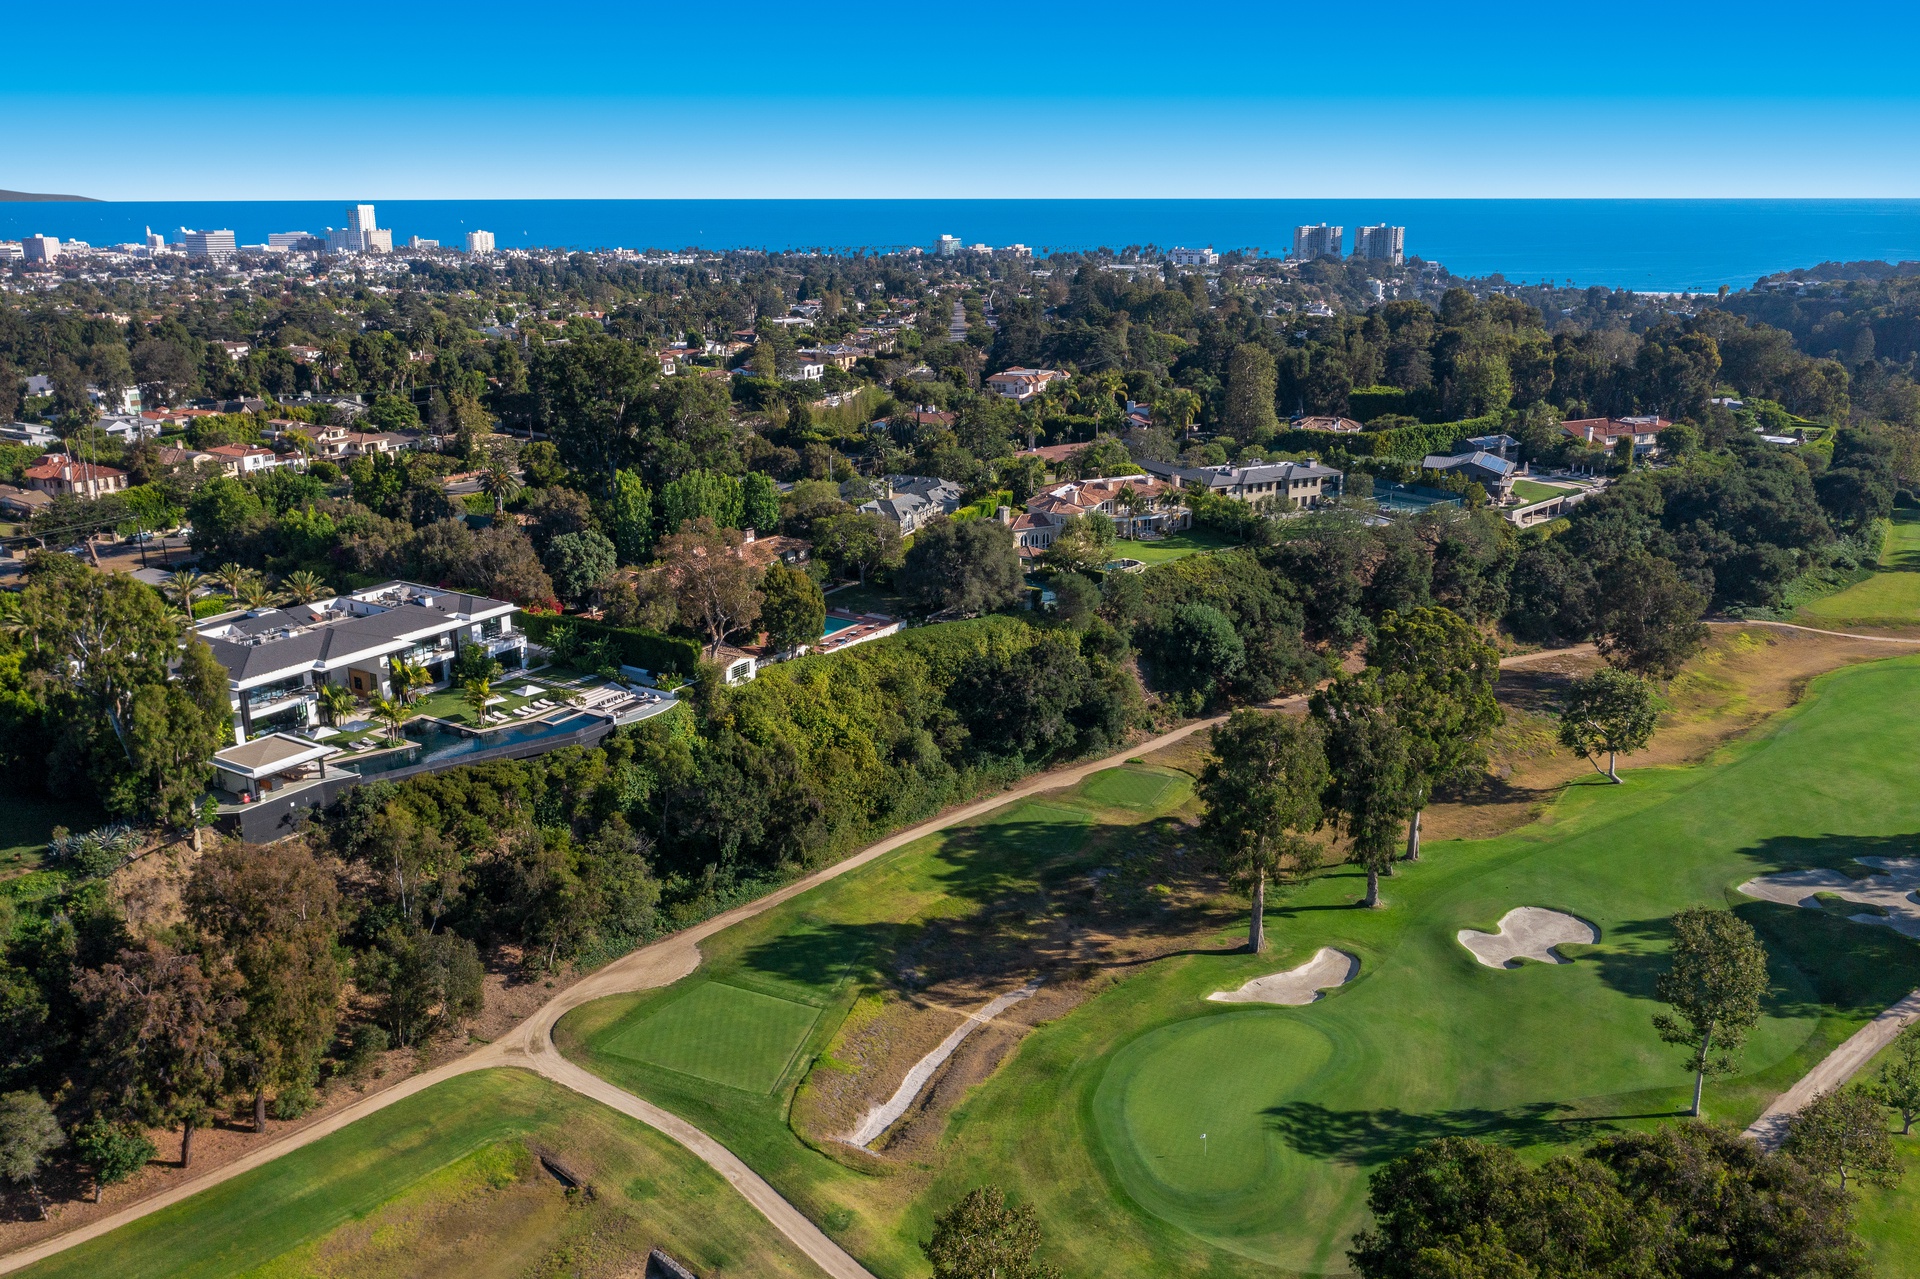 1525 San Vicente: A Luxury Residence with a Private Golf Course View »  Digs.net